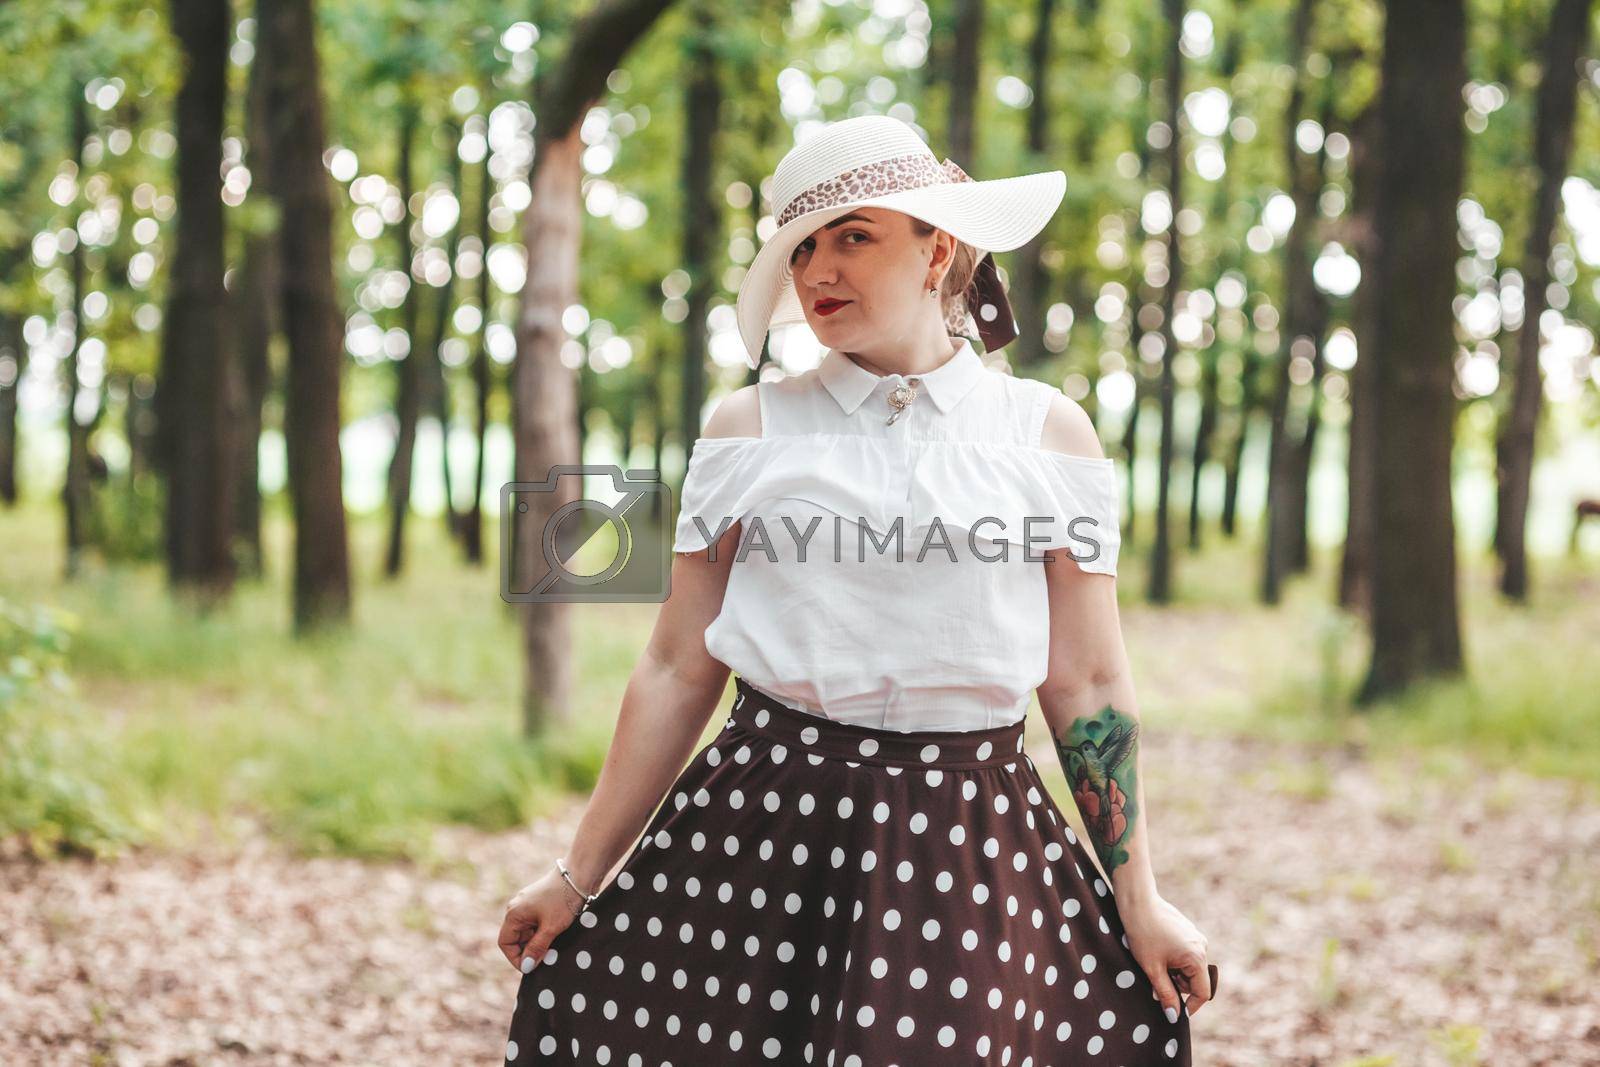 Royalty free image of young girl covered her face with a hat, in the woods by mosfet_ua